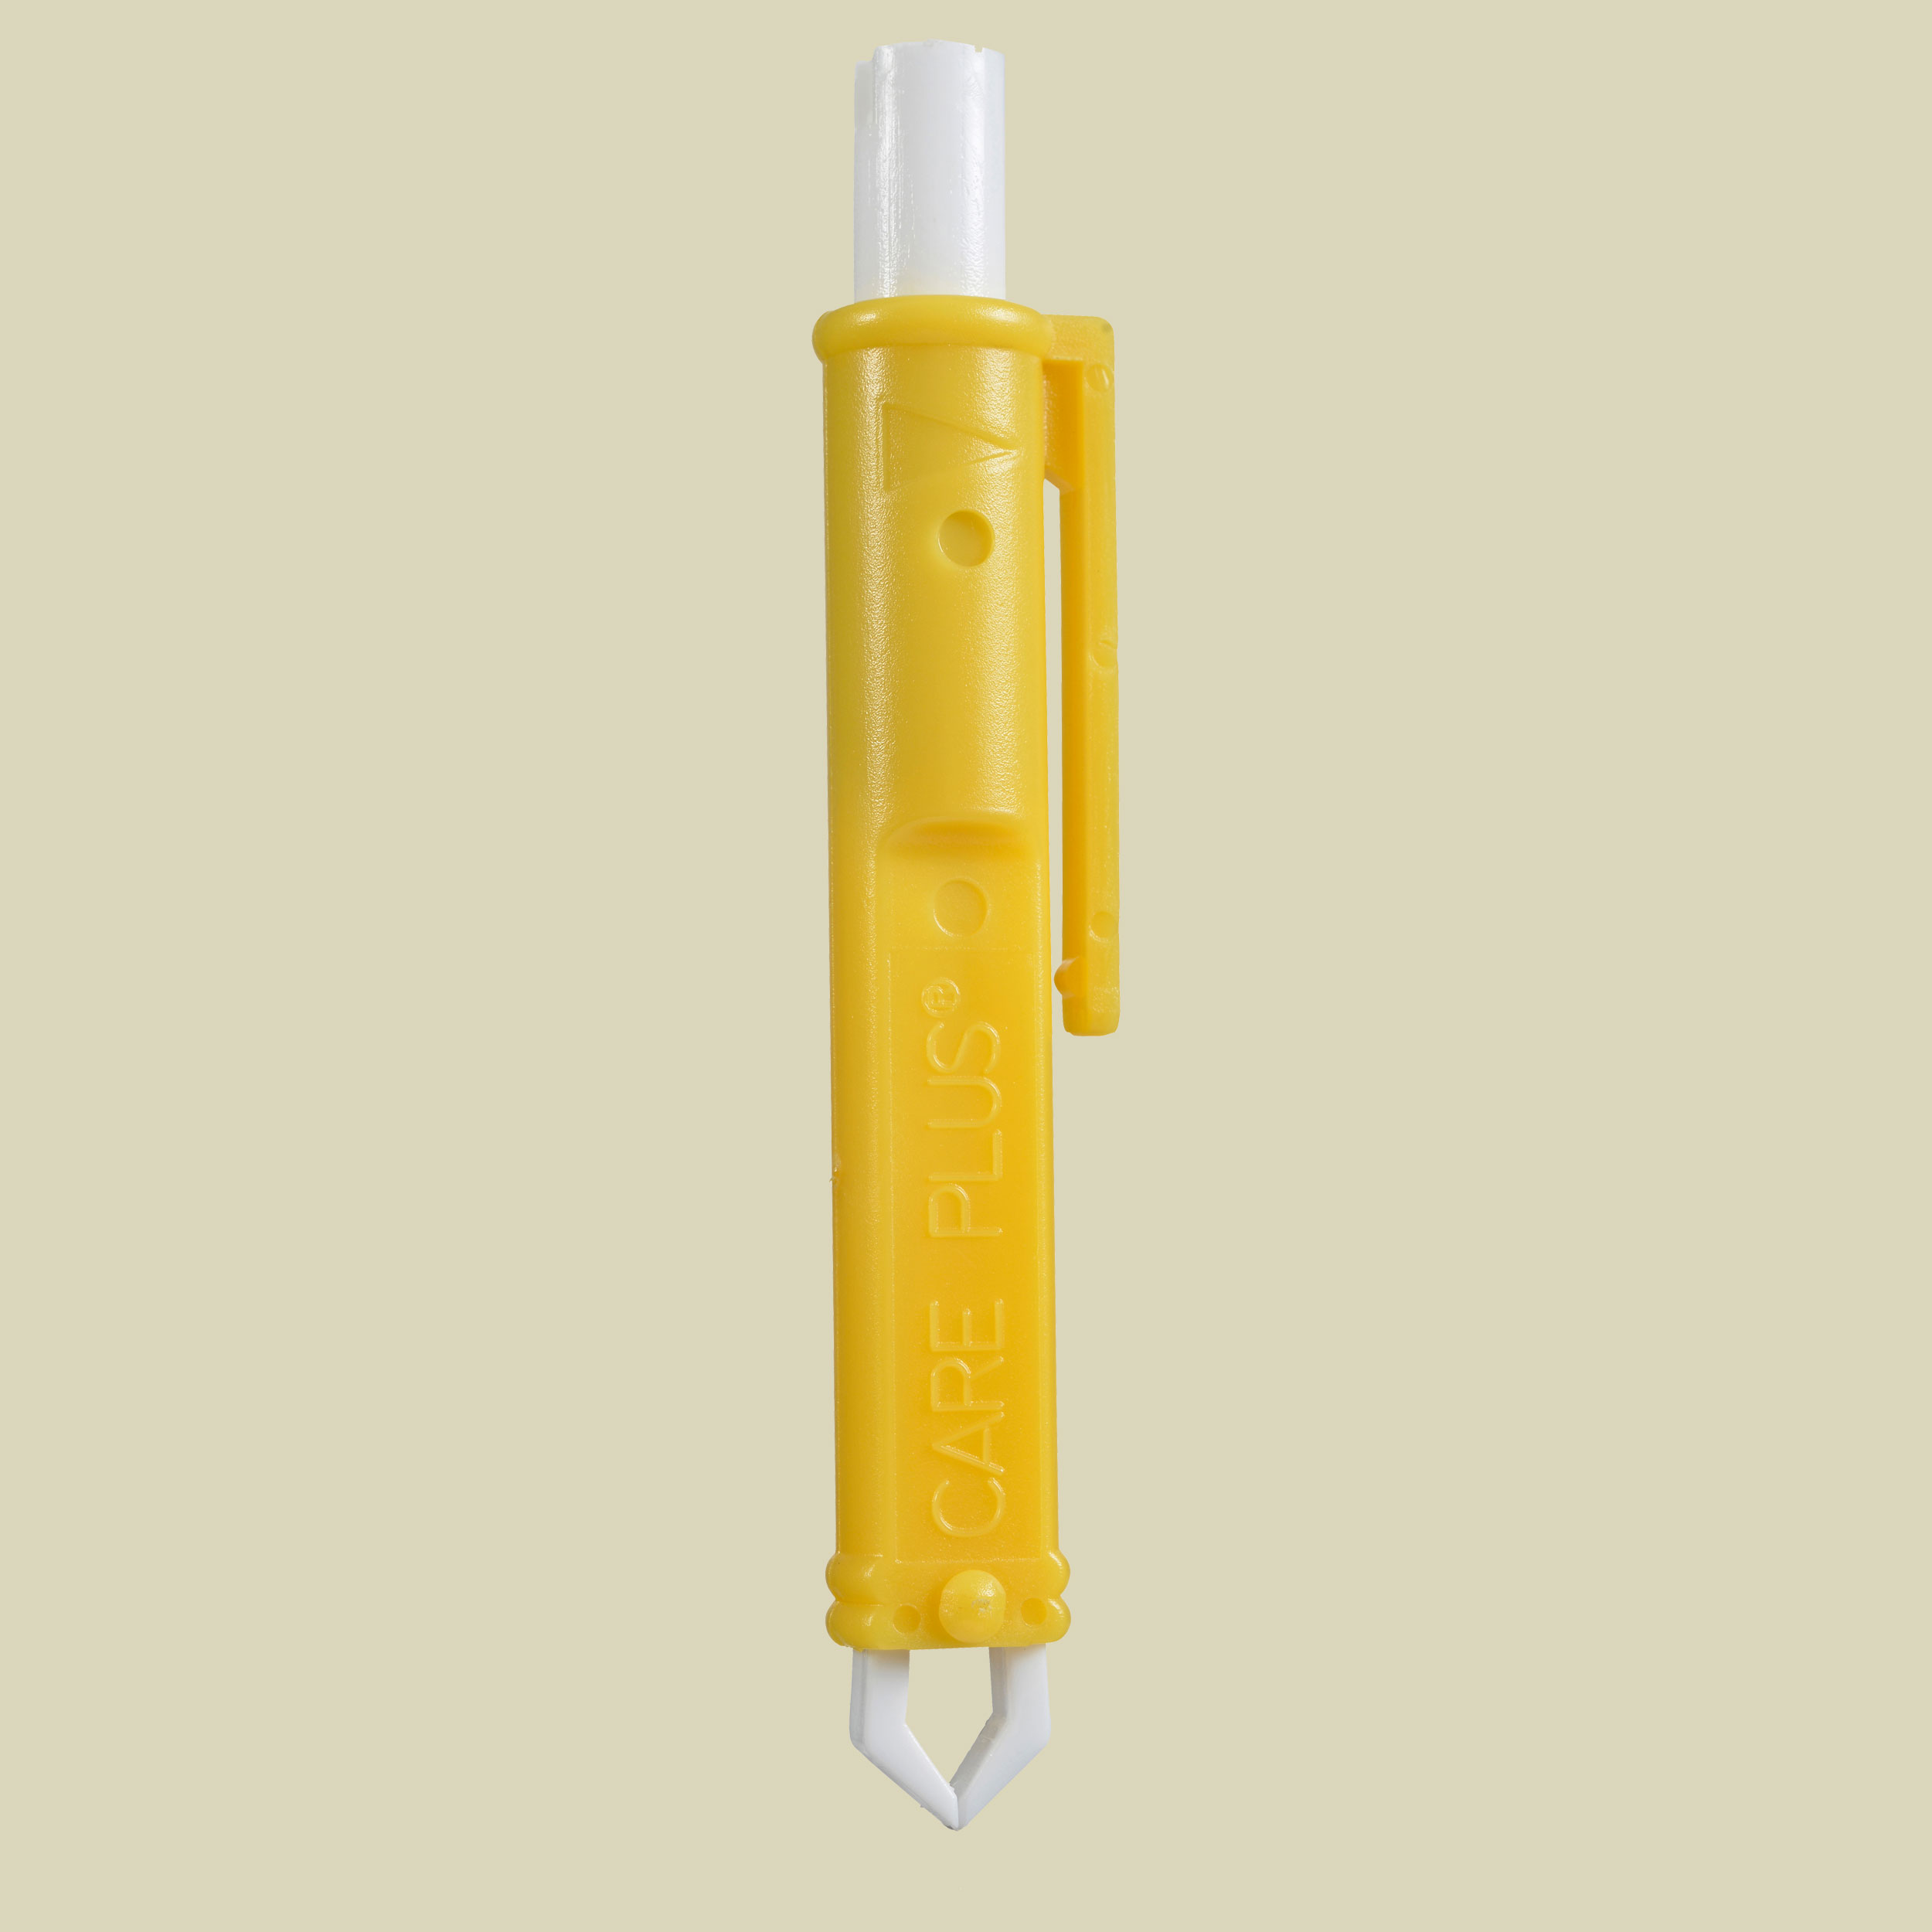 Tick-Out Tick Remover